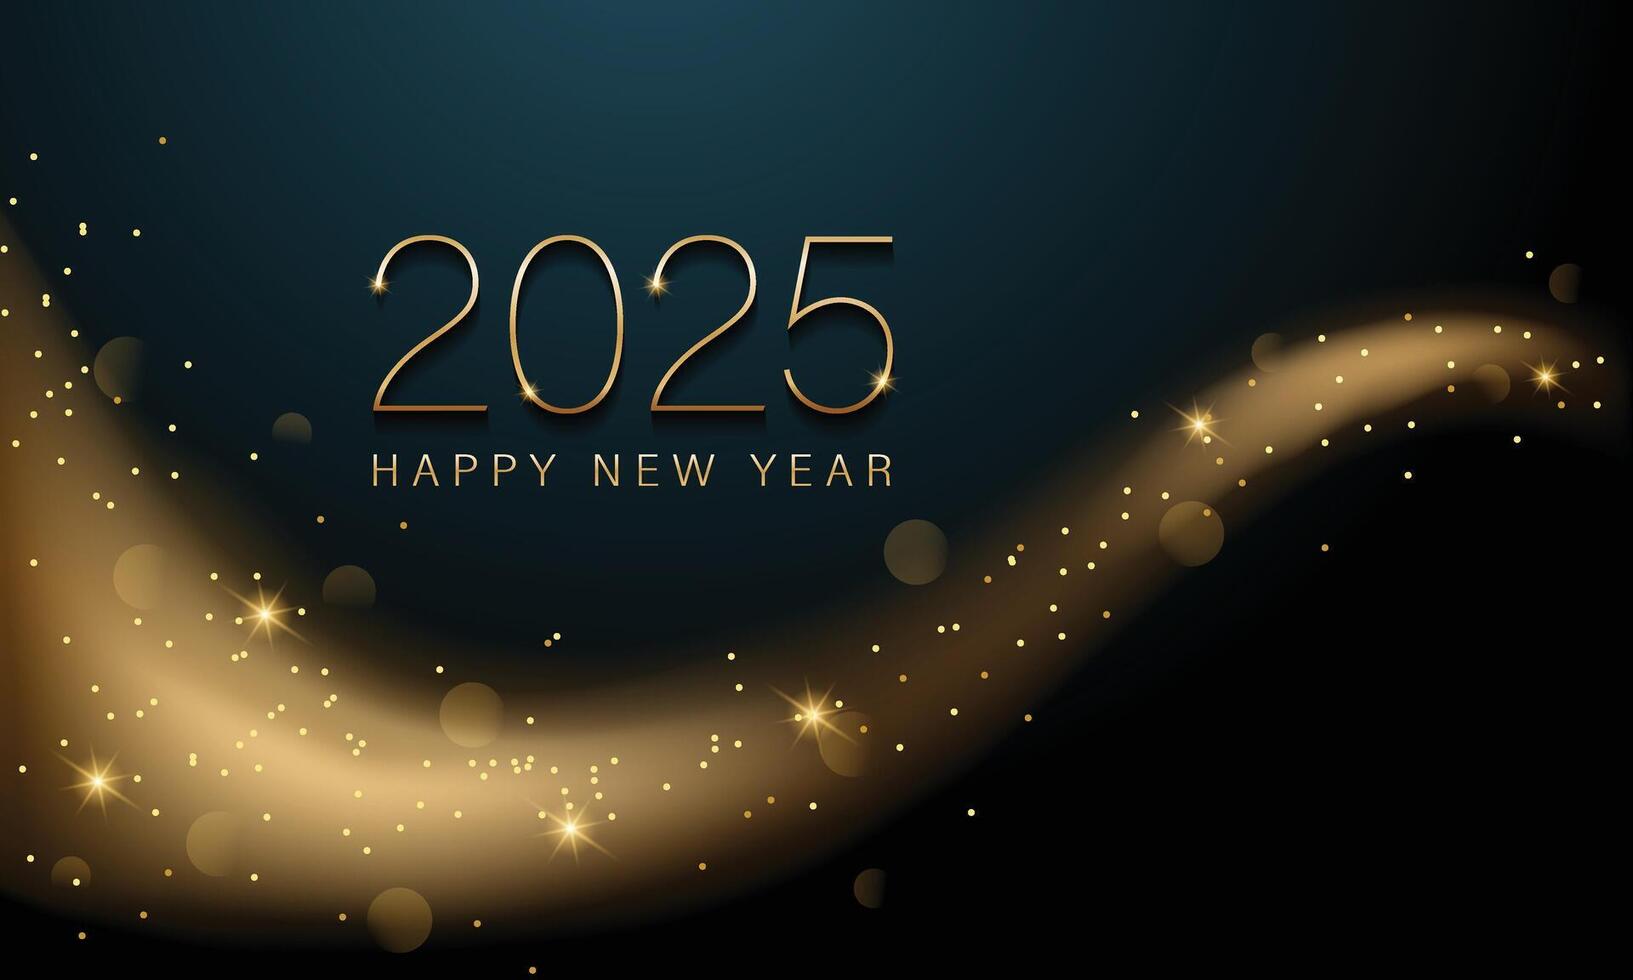 2025 New year with Abstract shiny color gold wave design element and glitter effect on dark background. For Calendar, poster design vector